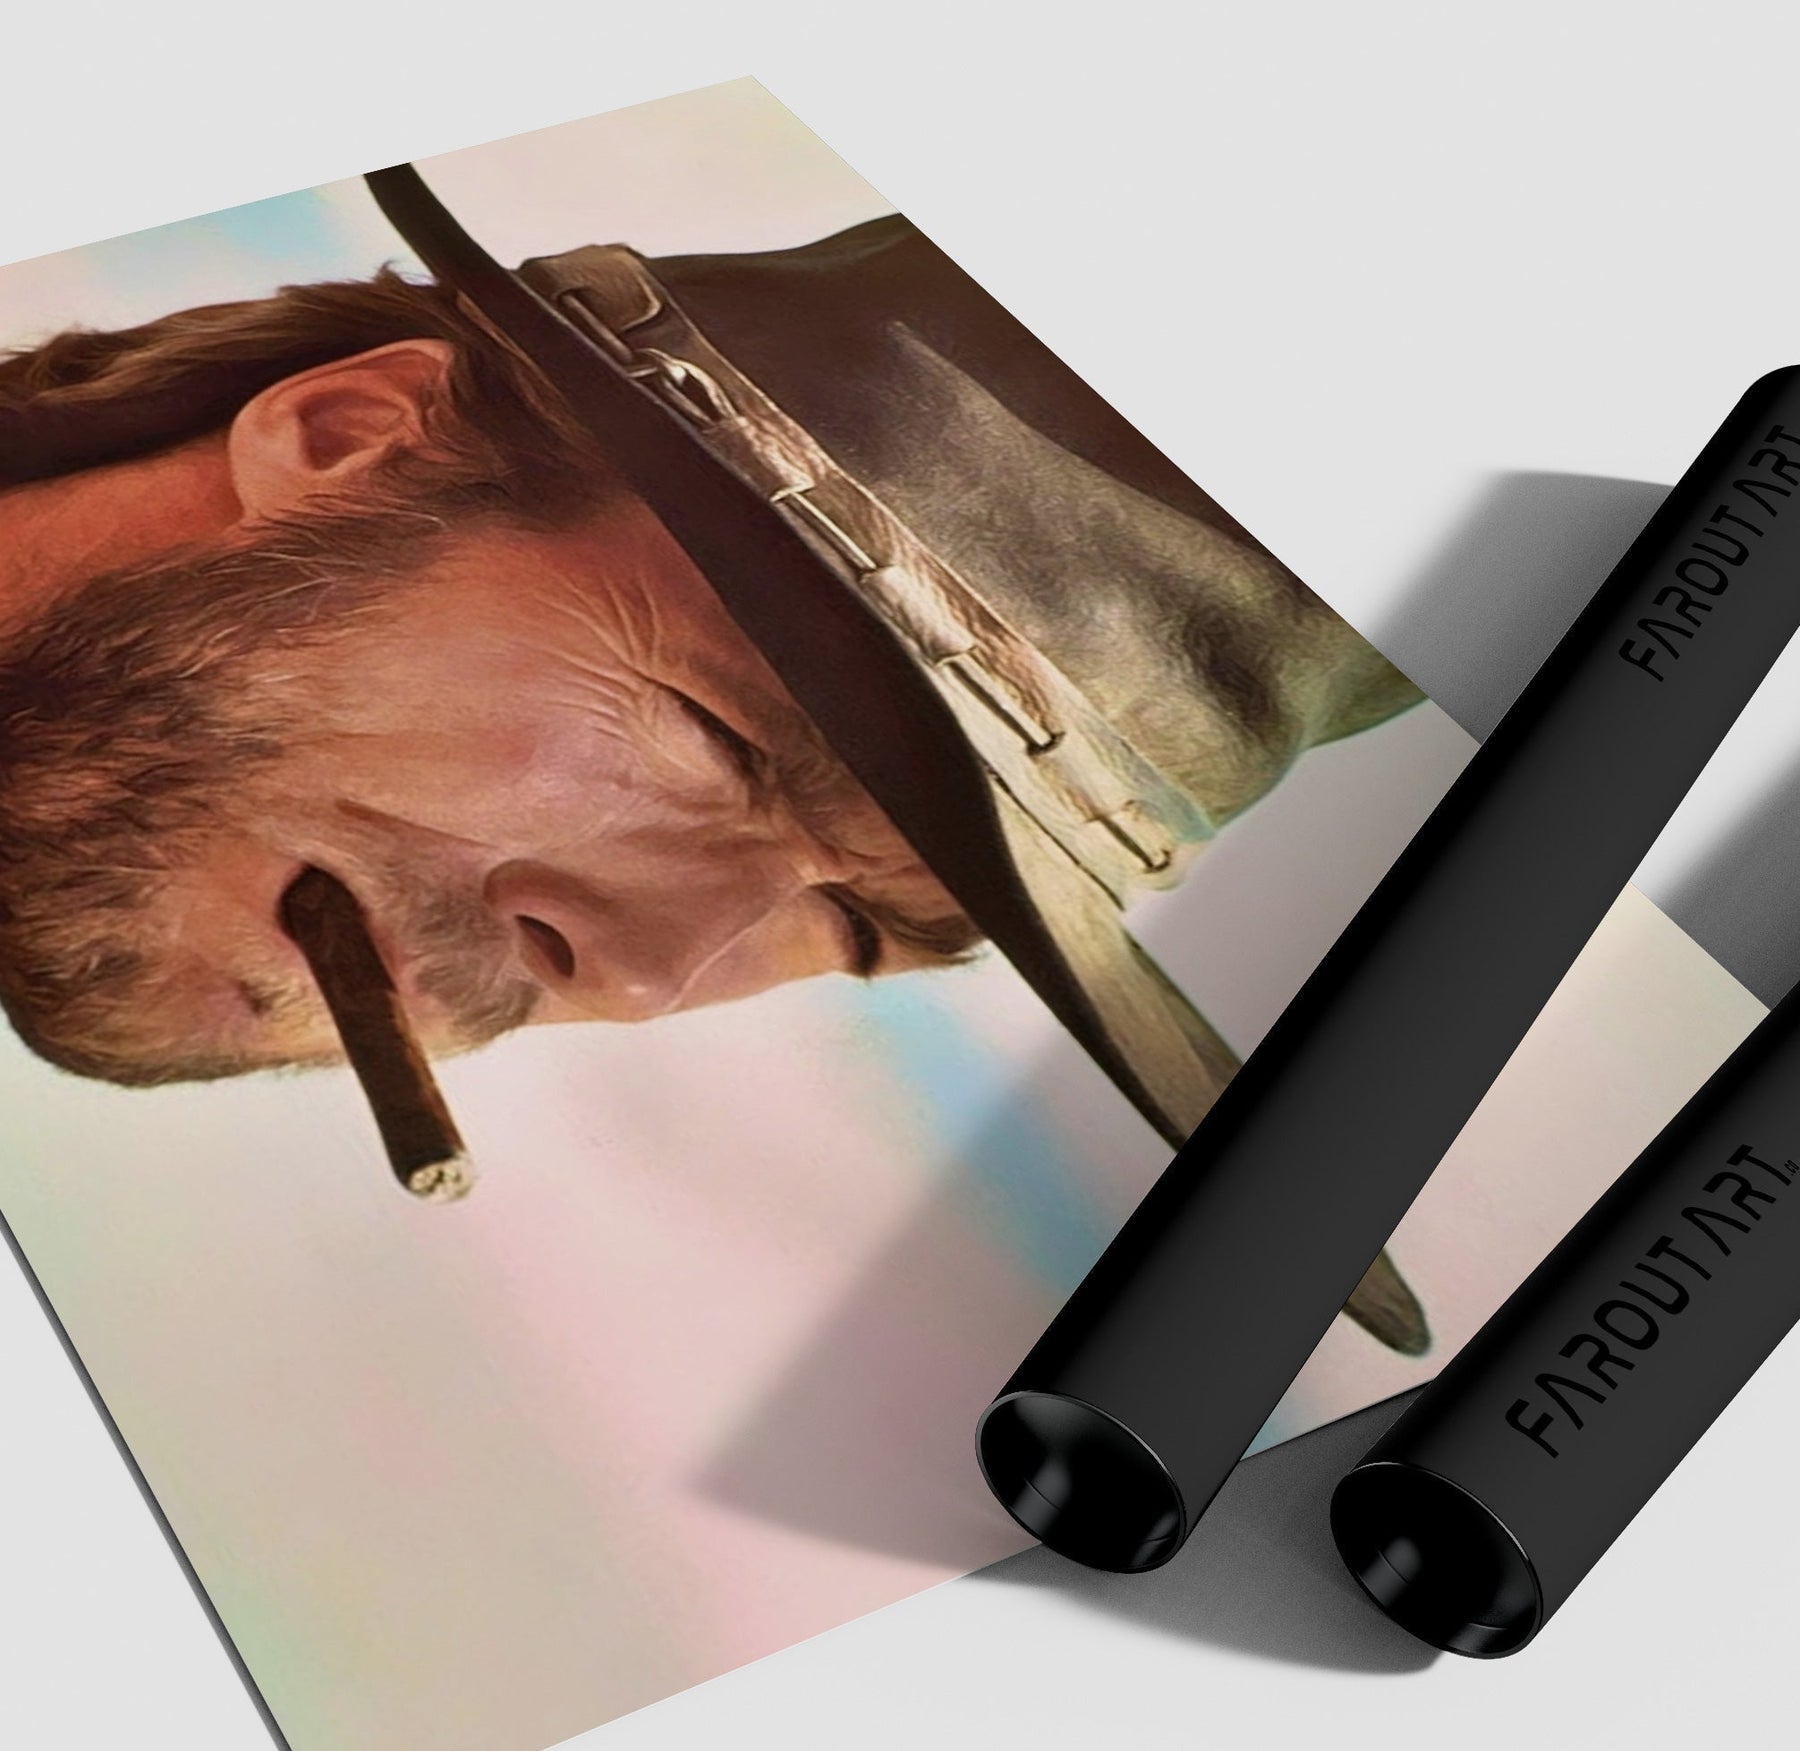 Eastwood Cigar Poster/Canvas | Far Out Art 